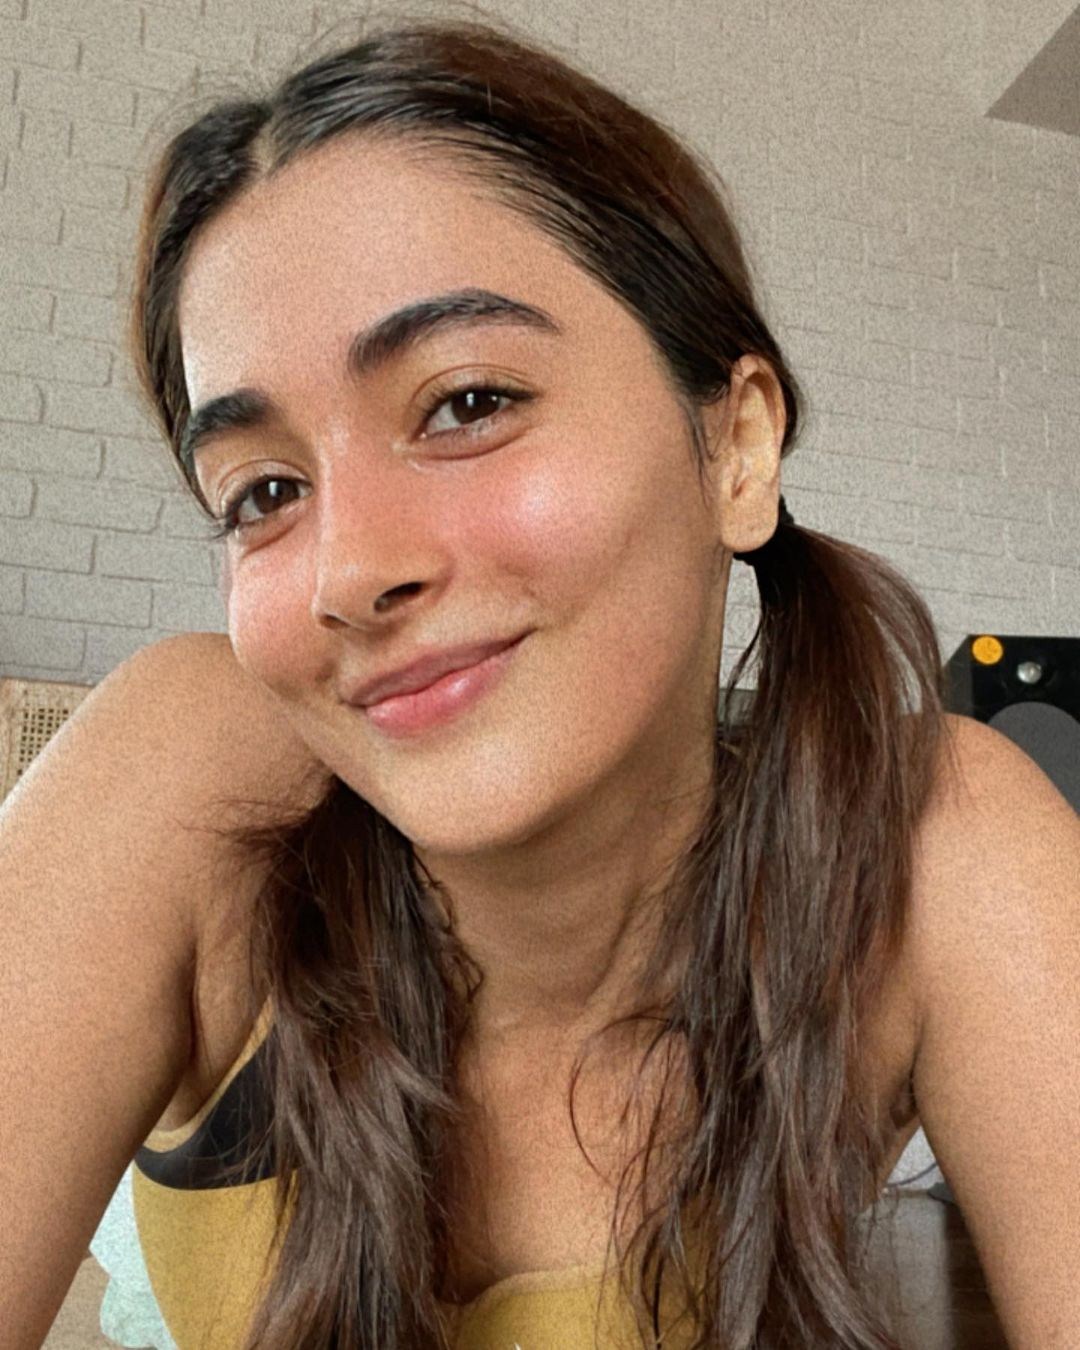 Tollywood gorgeous beauty pooja hegde latest selfie images-Actresspooja, Pooja Hegde, Poojahegde, Sonam Bajwa, Tollywoodpooja Photos,Spicy Hot Pics,Images,High Resolution WallPapers Download